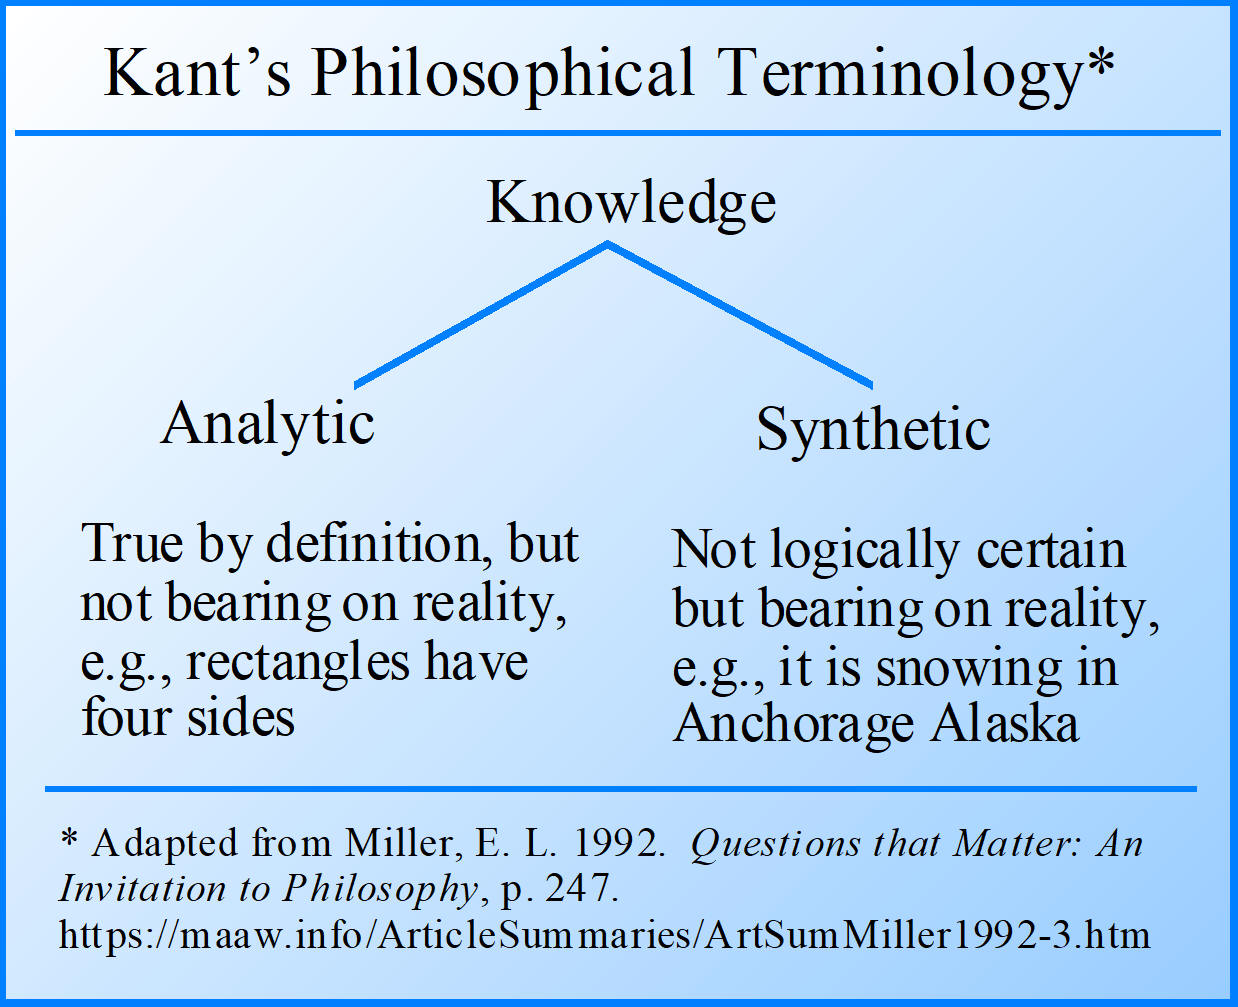 Two types of knowledge: Analytic and Synthetic